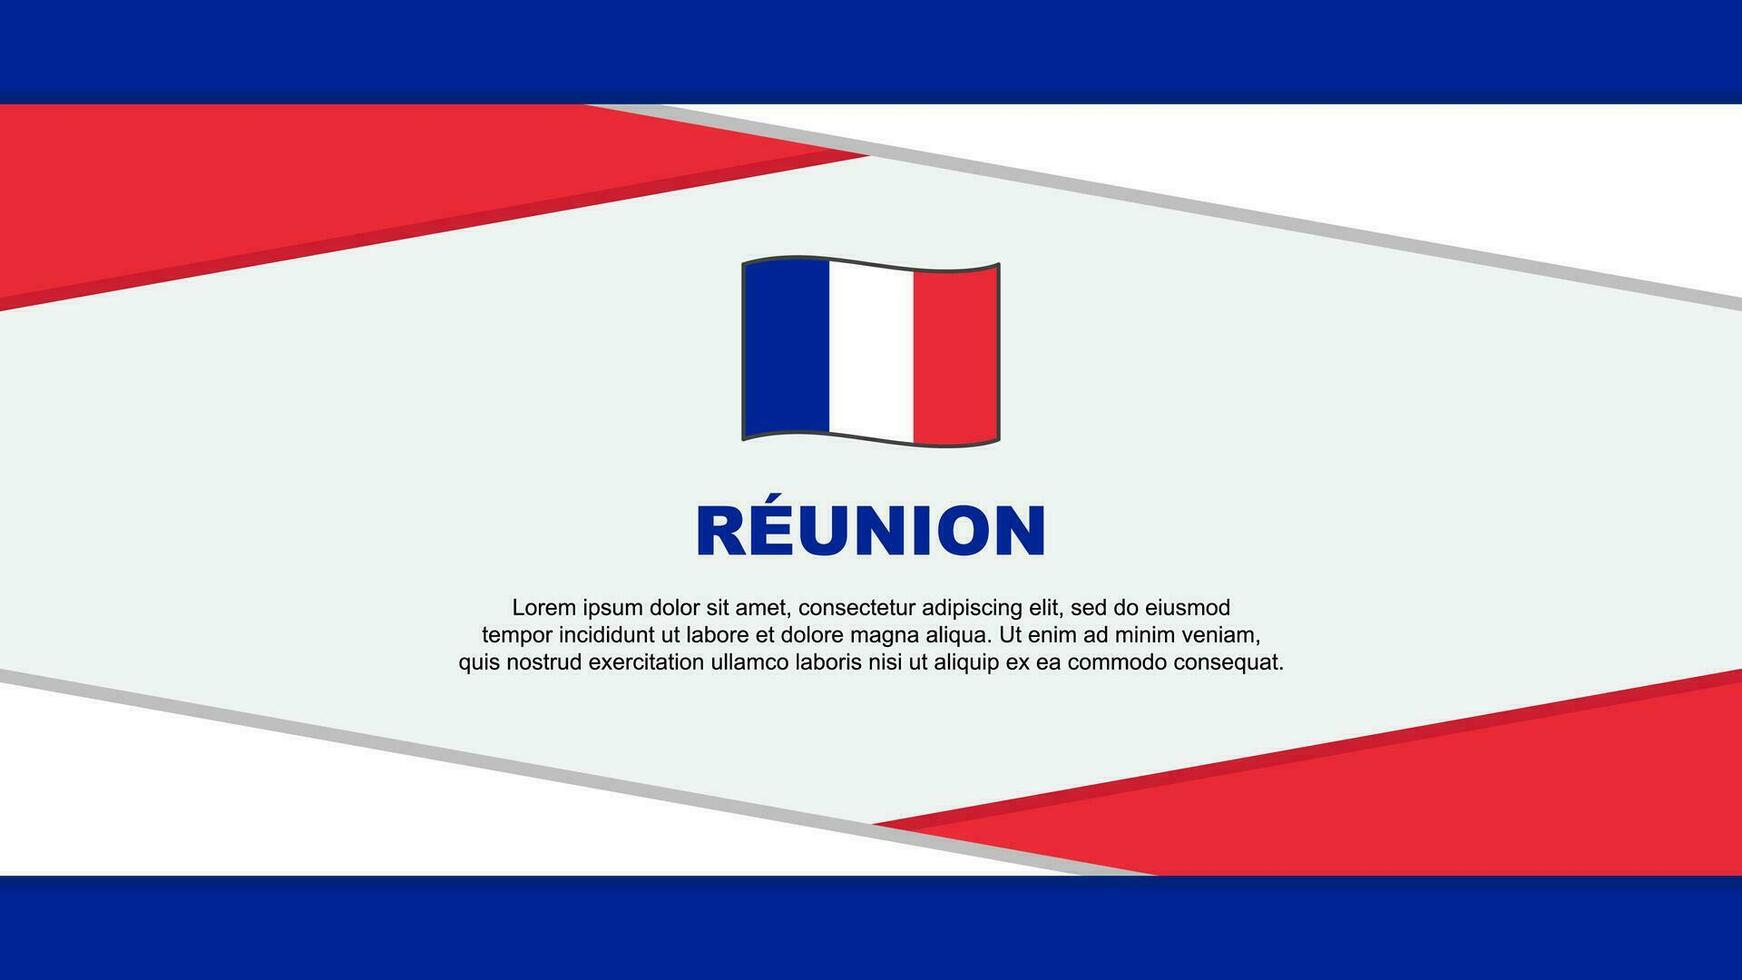 Reunion Flag Abstract Background Design Template. Reunion Independence Day Banner Cartoon Vector Illustration. Reunion Vector